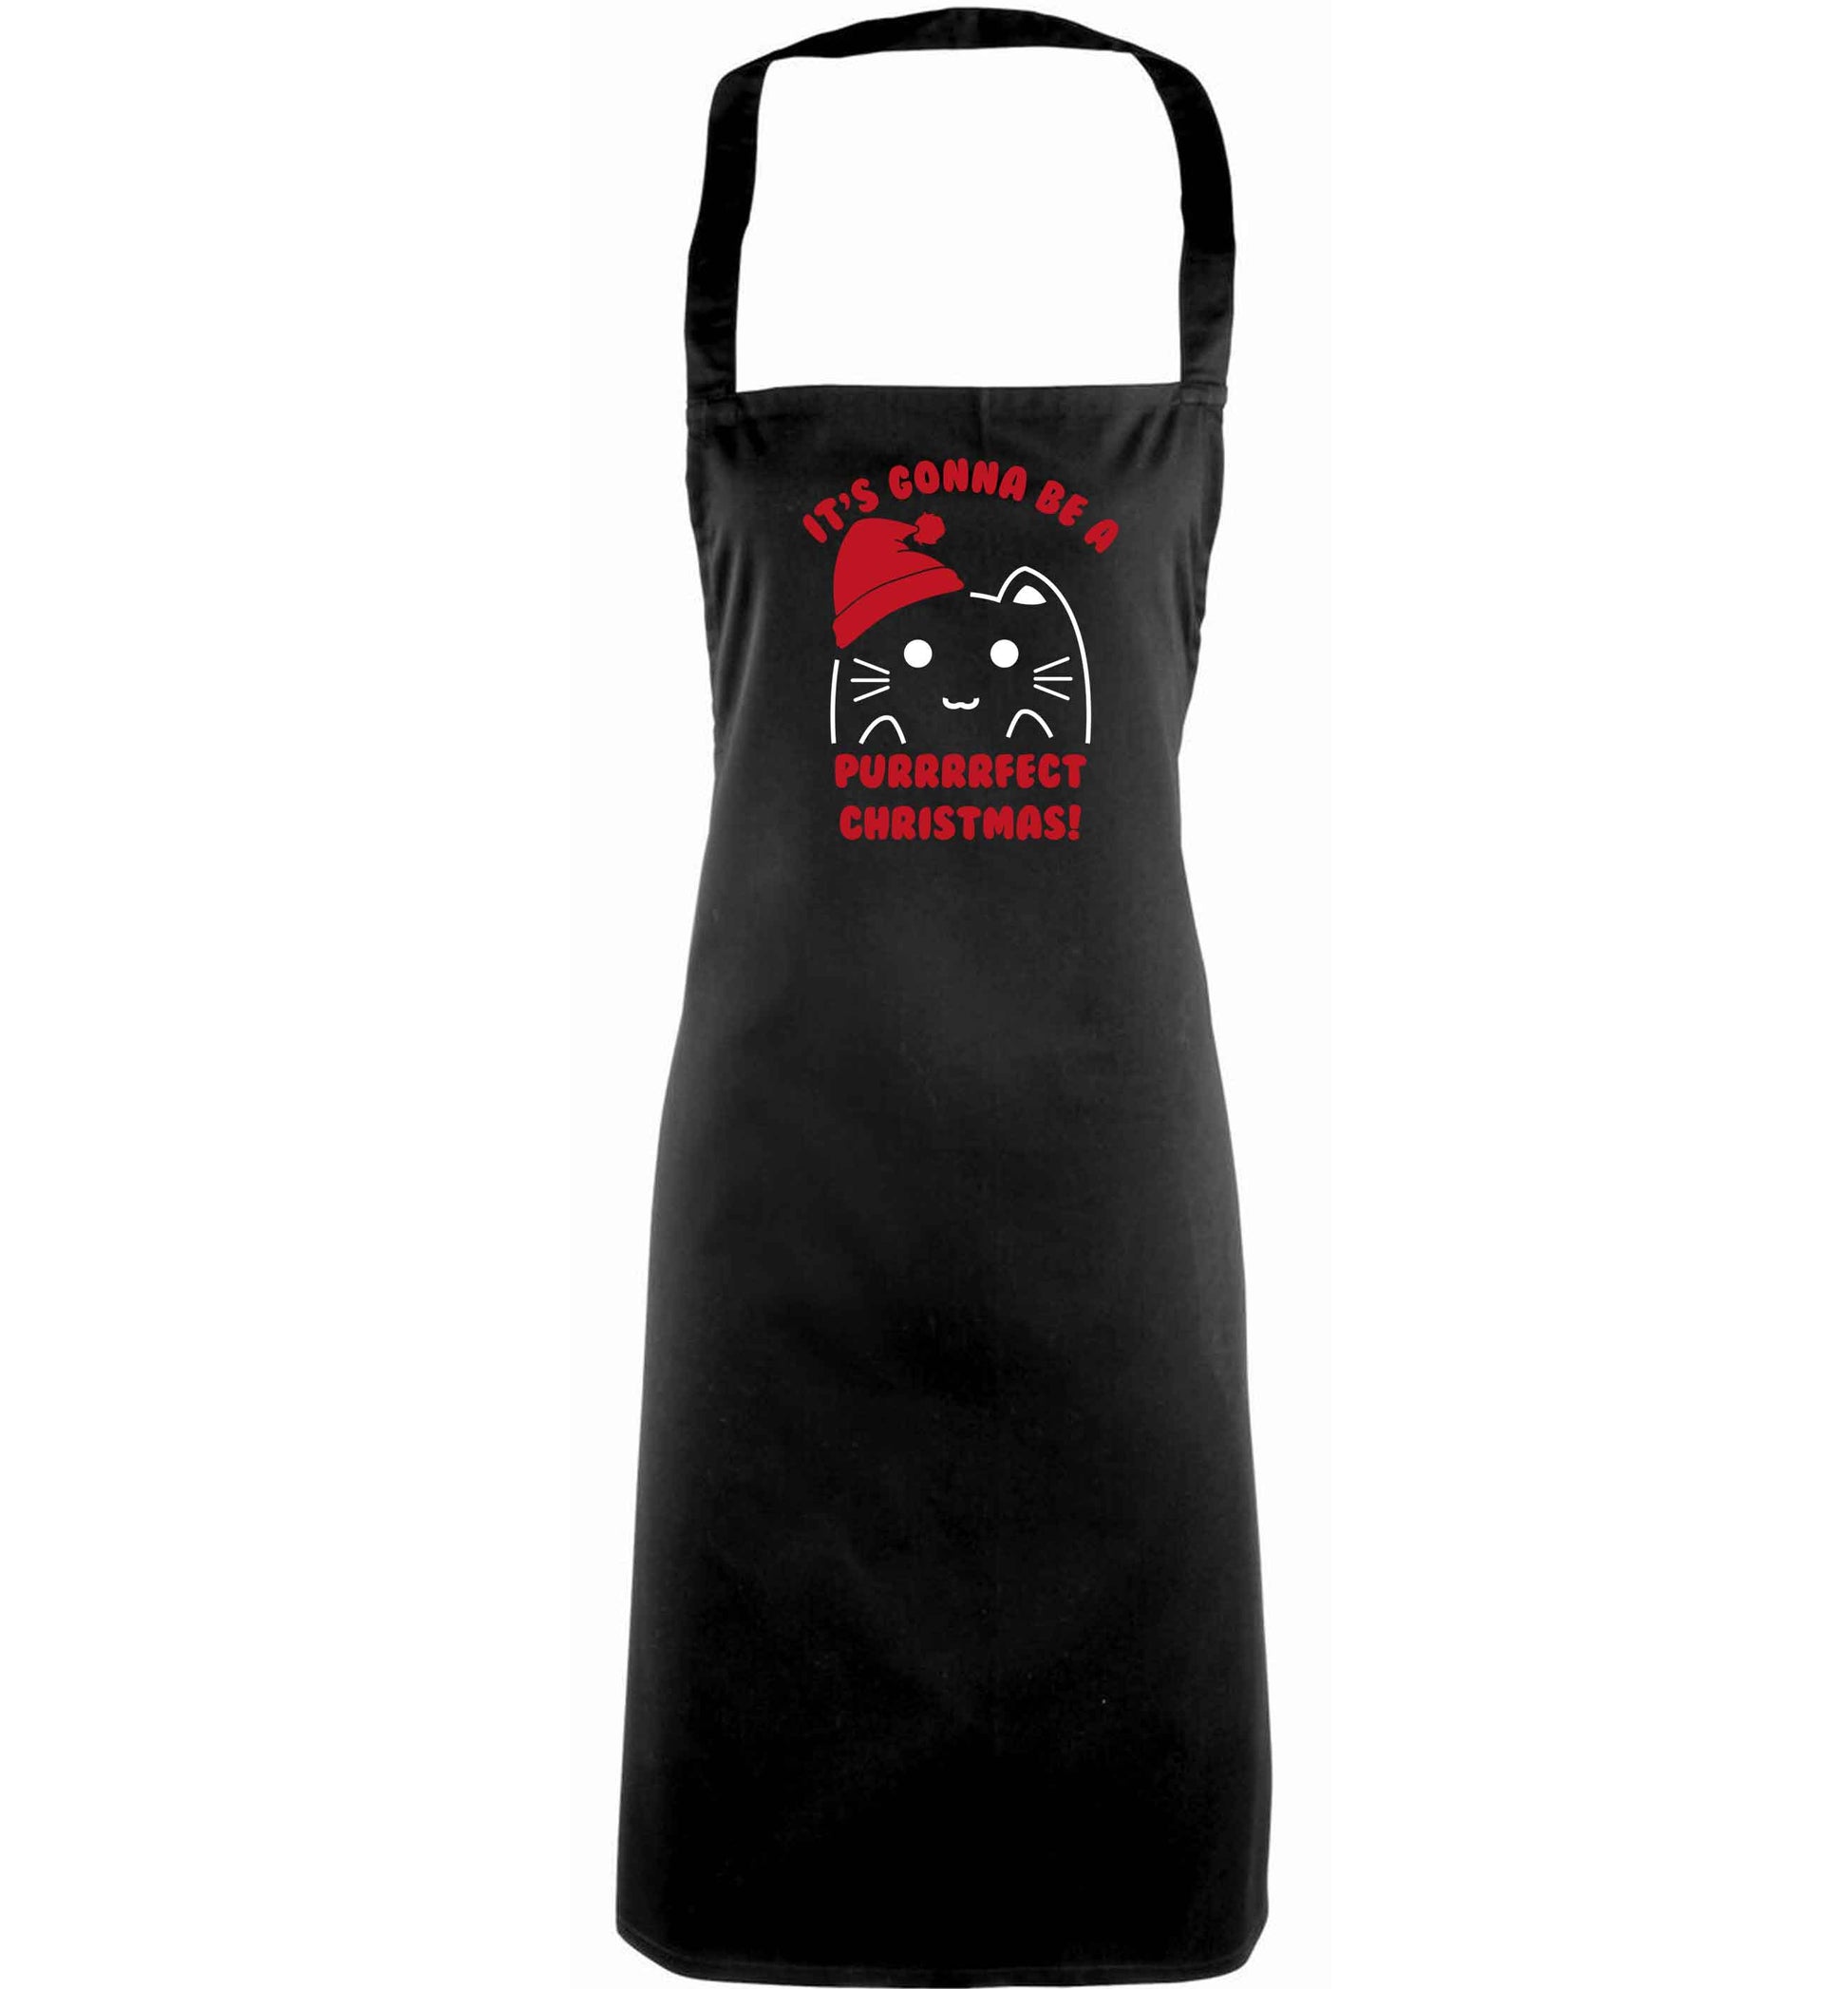 It's going to be a purrfect Christmas adults black apron